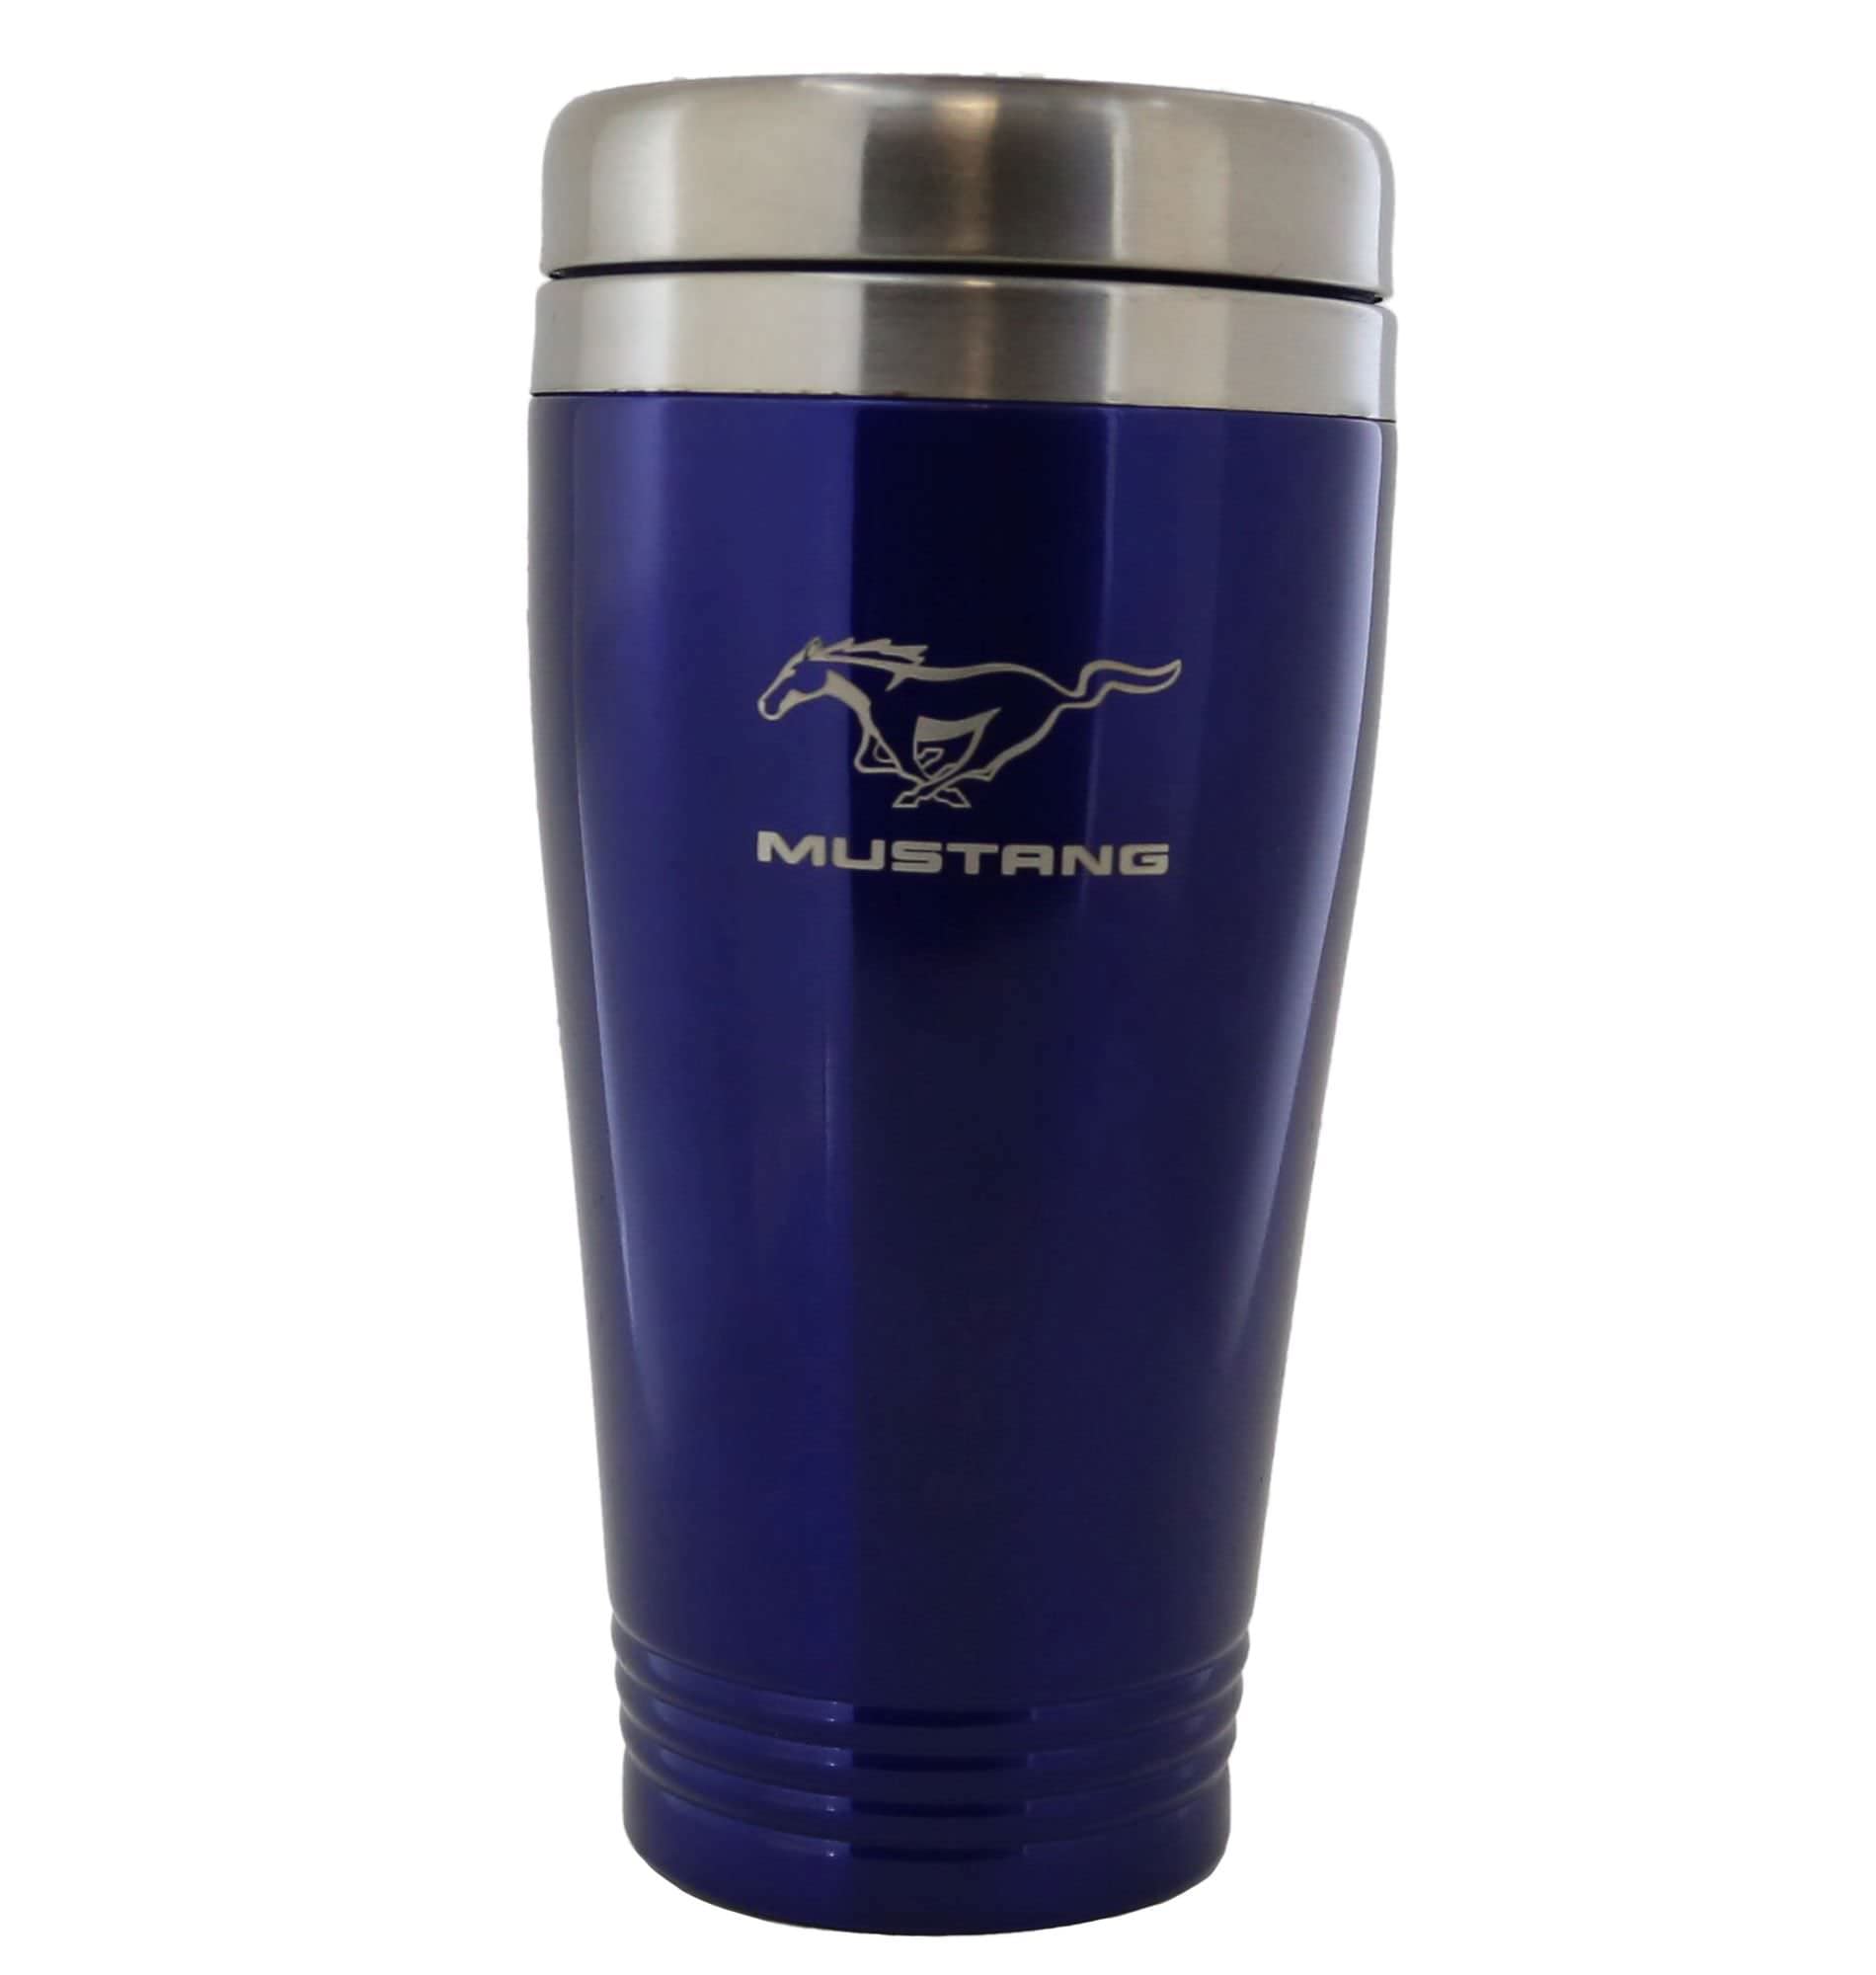 Au-TOMOTIVE GOLD Stainless Steel Travel Mug for Ford Mustang (Blue)